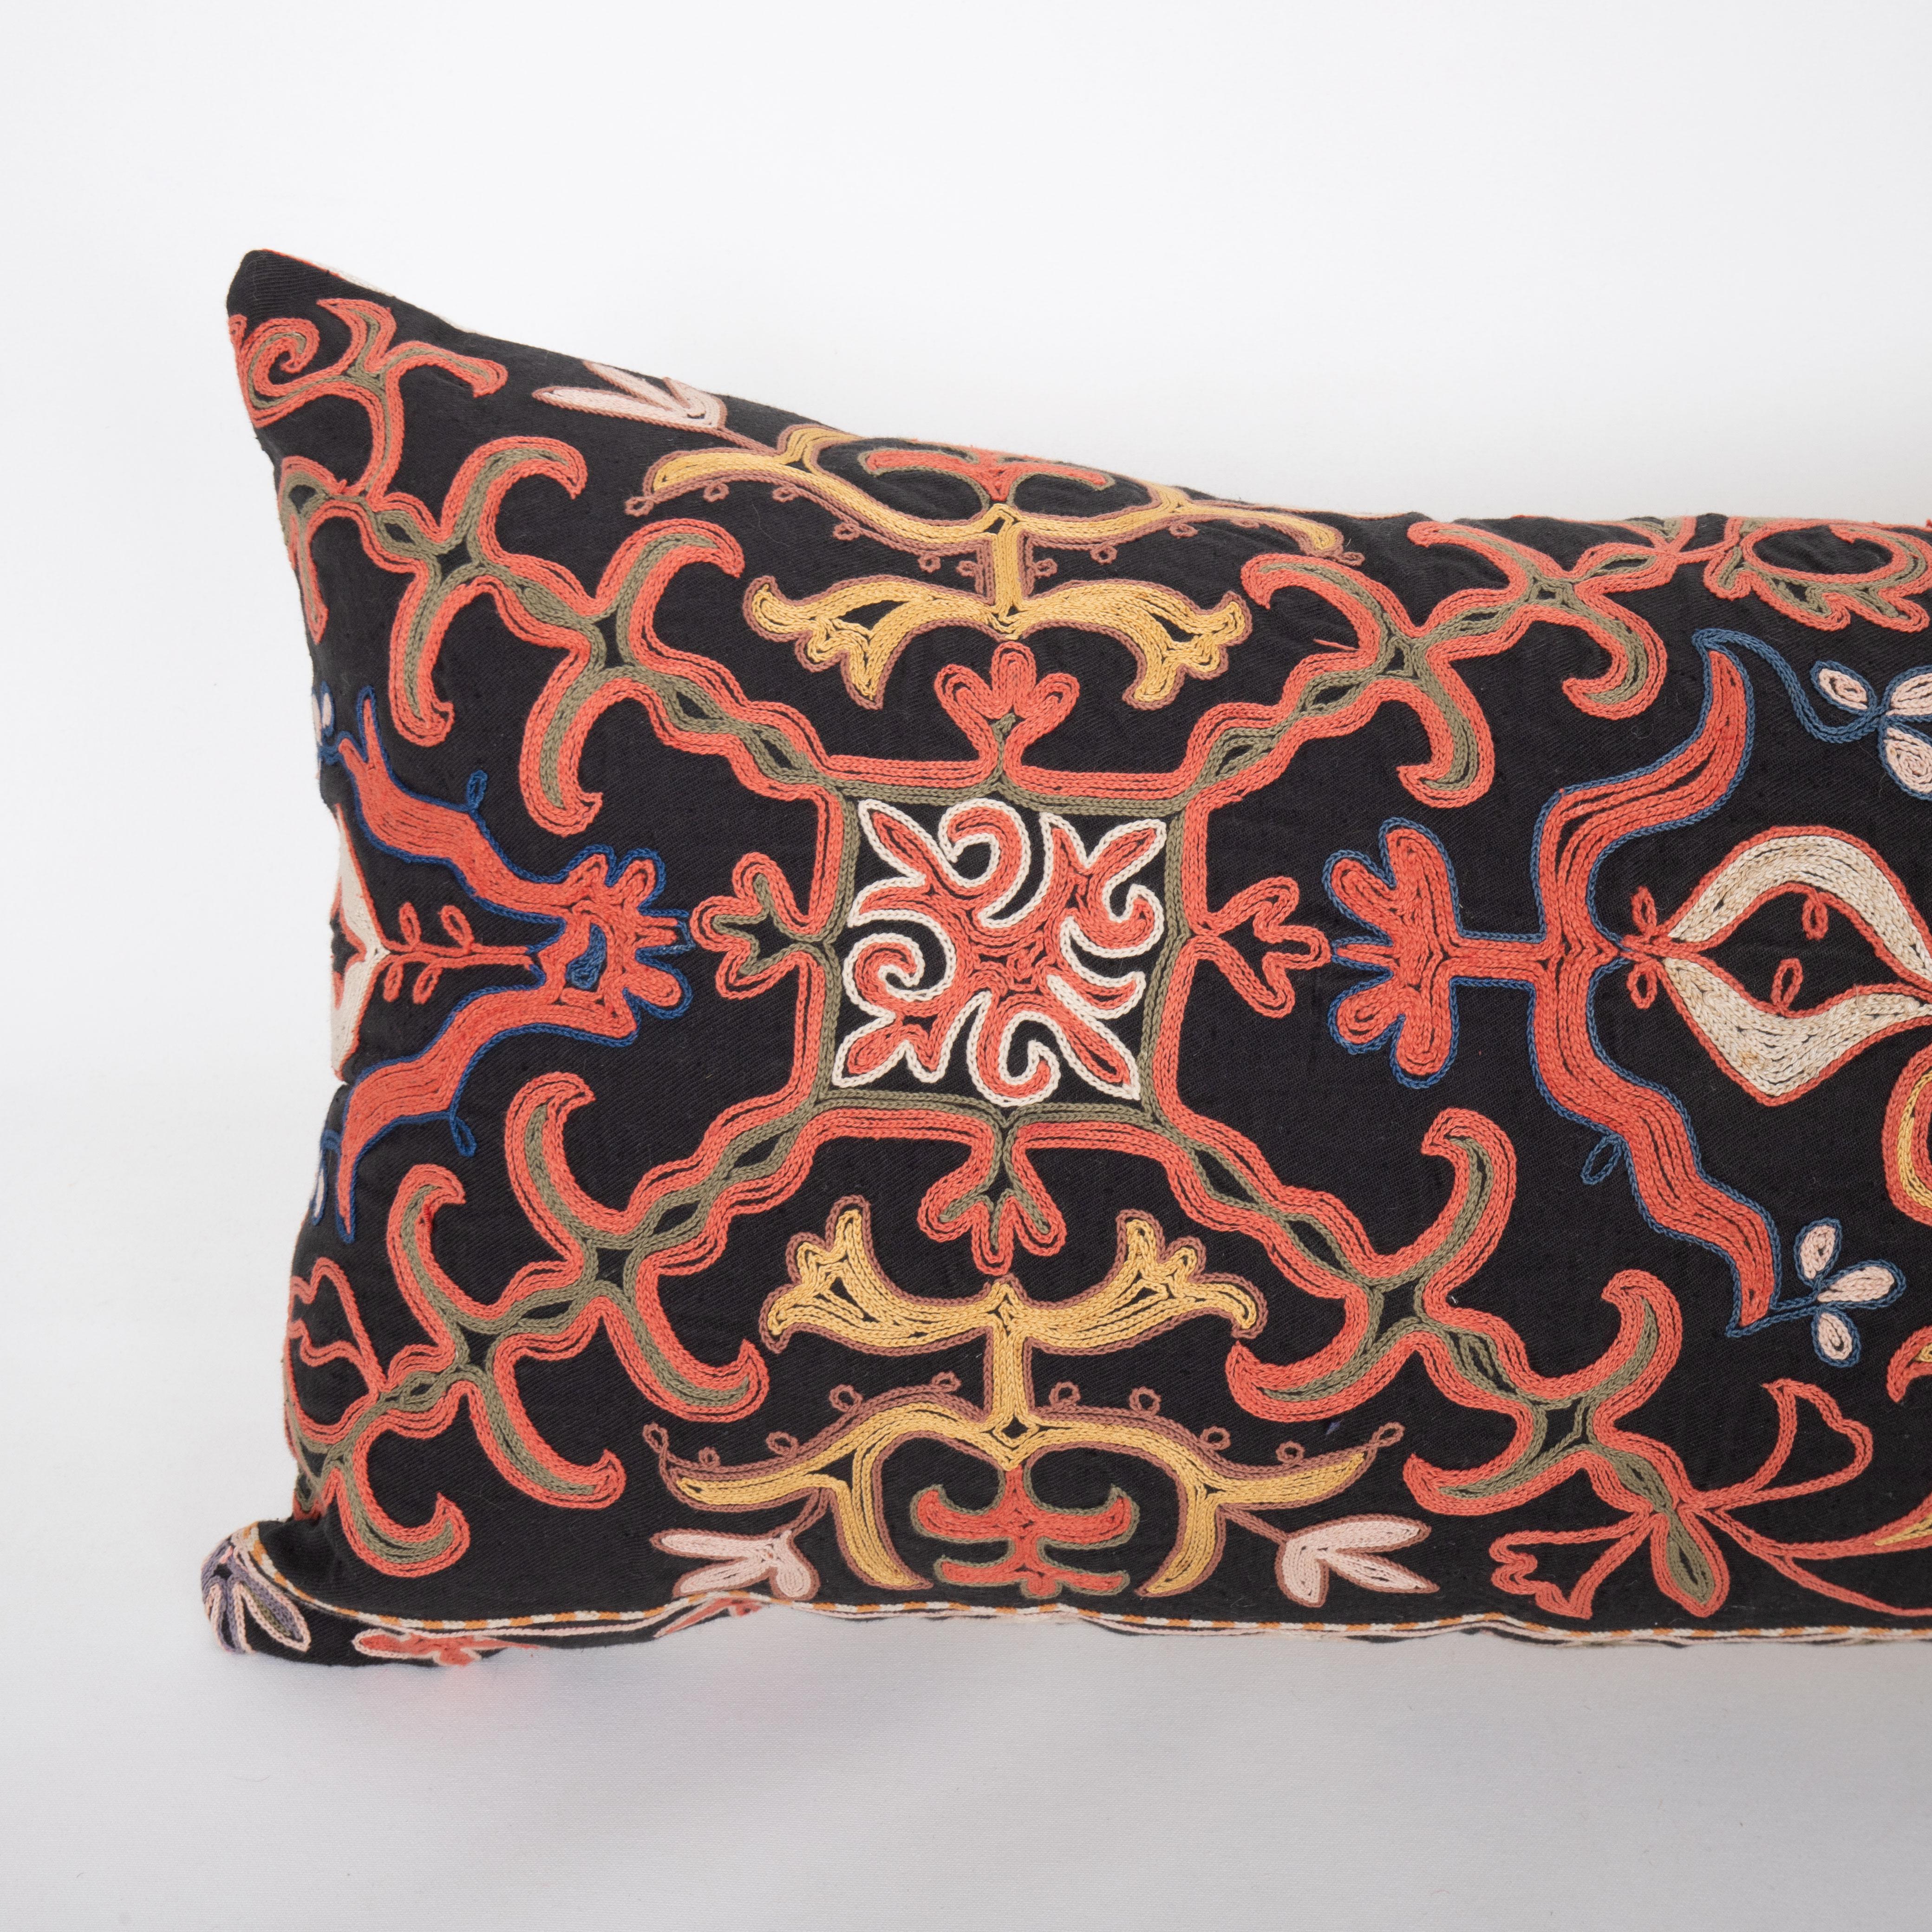 Suzani Pillowcase made from a mid 20th. C. Kazakh / Kyrgyz Embroidery